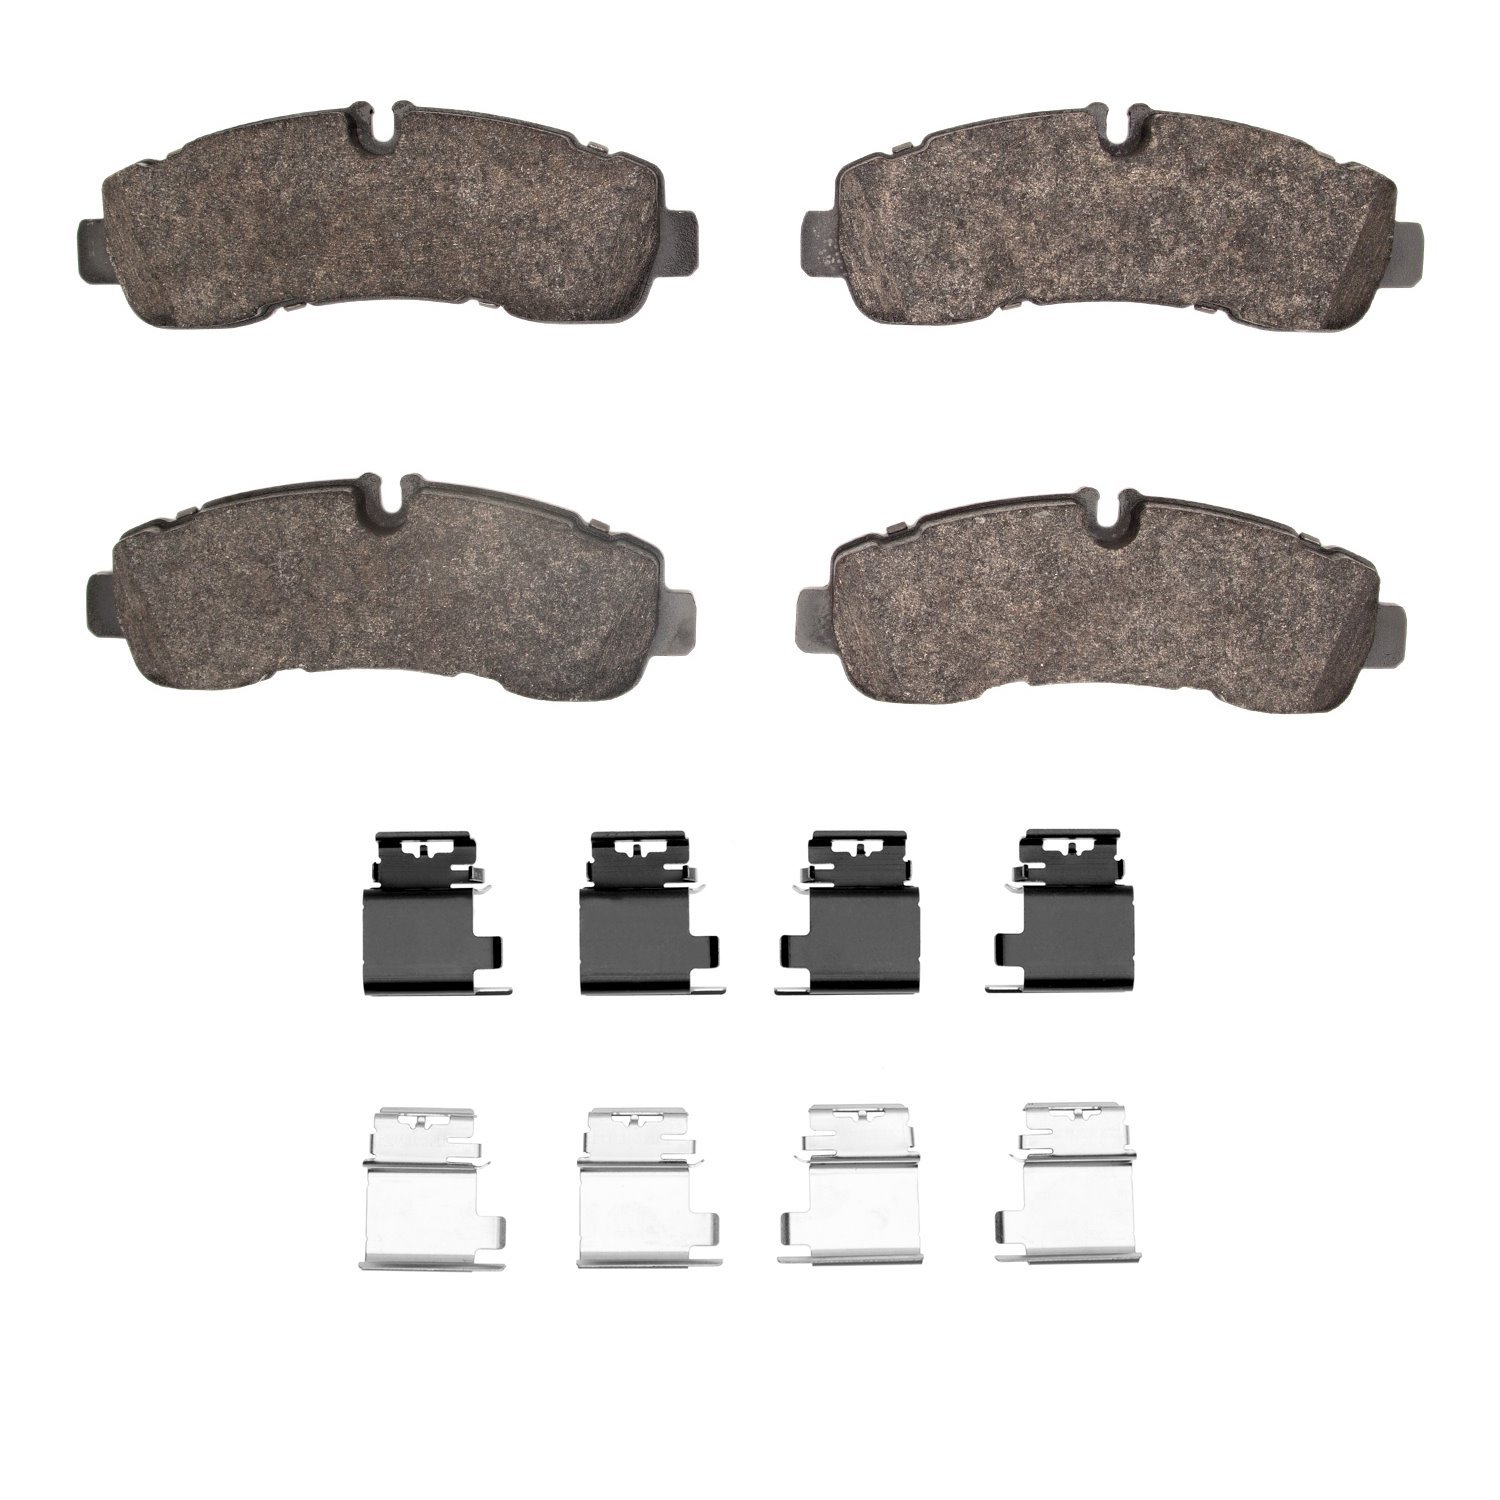 1214-2281-01 Heavy-Duty Brake Pads & Hardware Kit, Fits Select Ford/Lincoln/Mercury/Mazda, Position: Rear